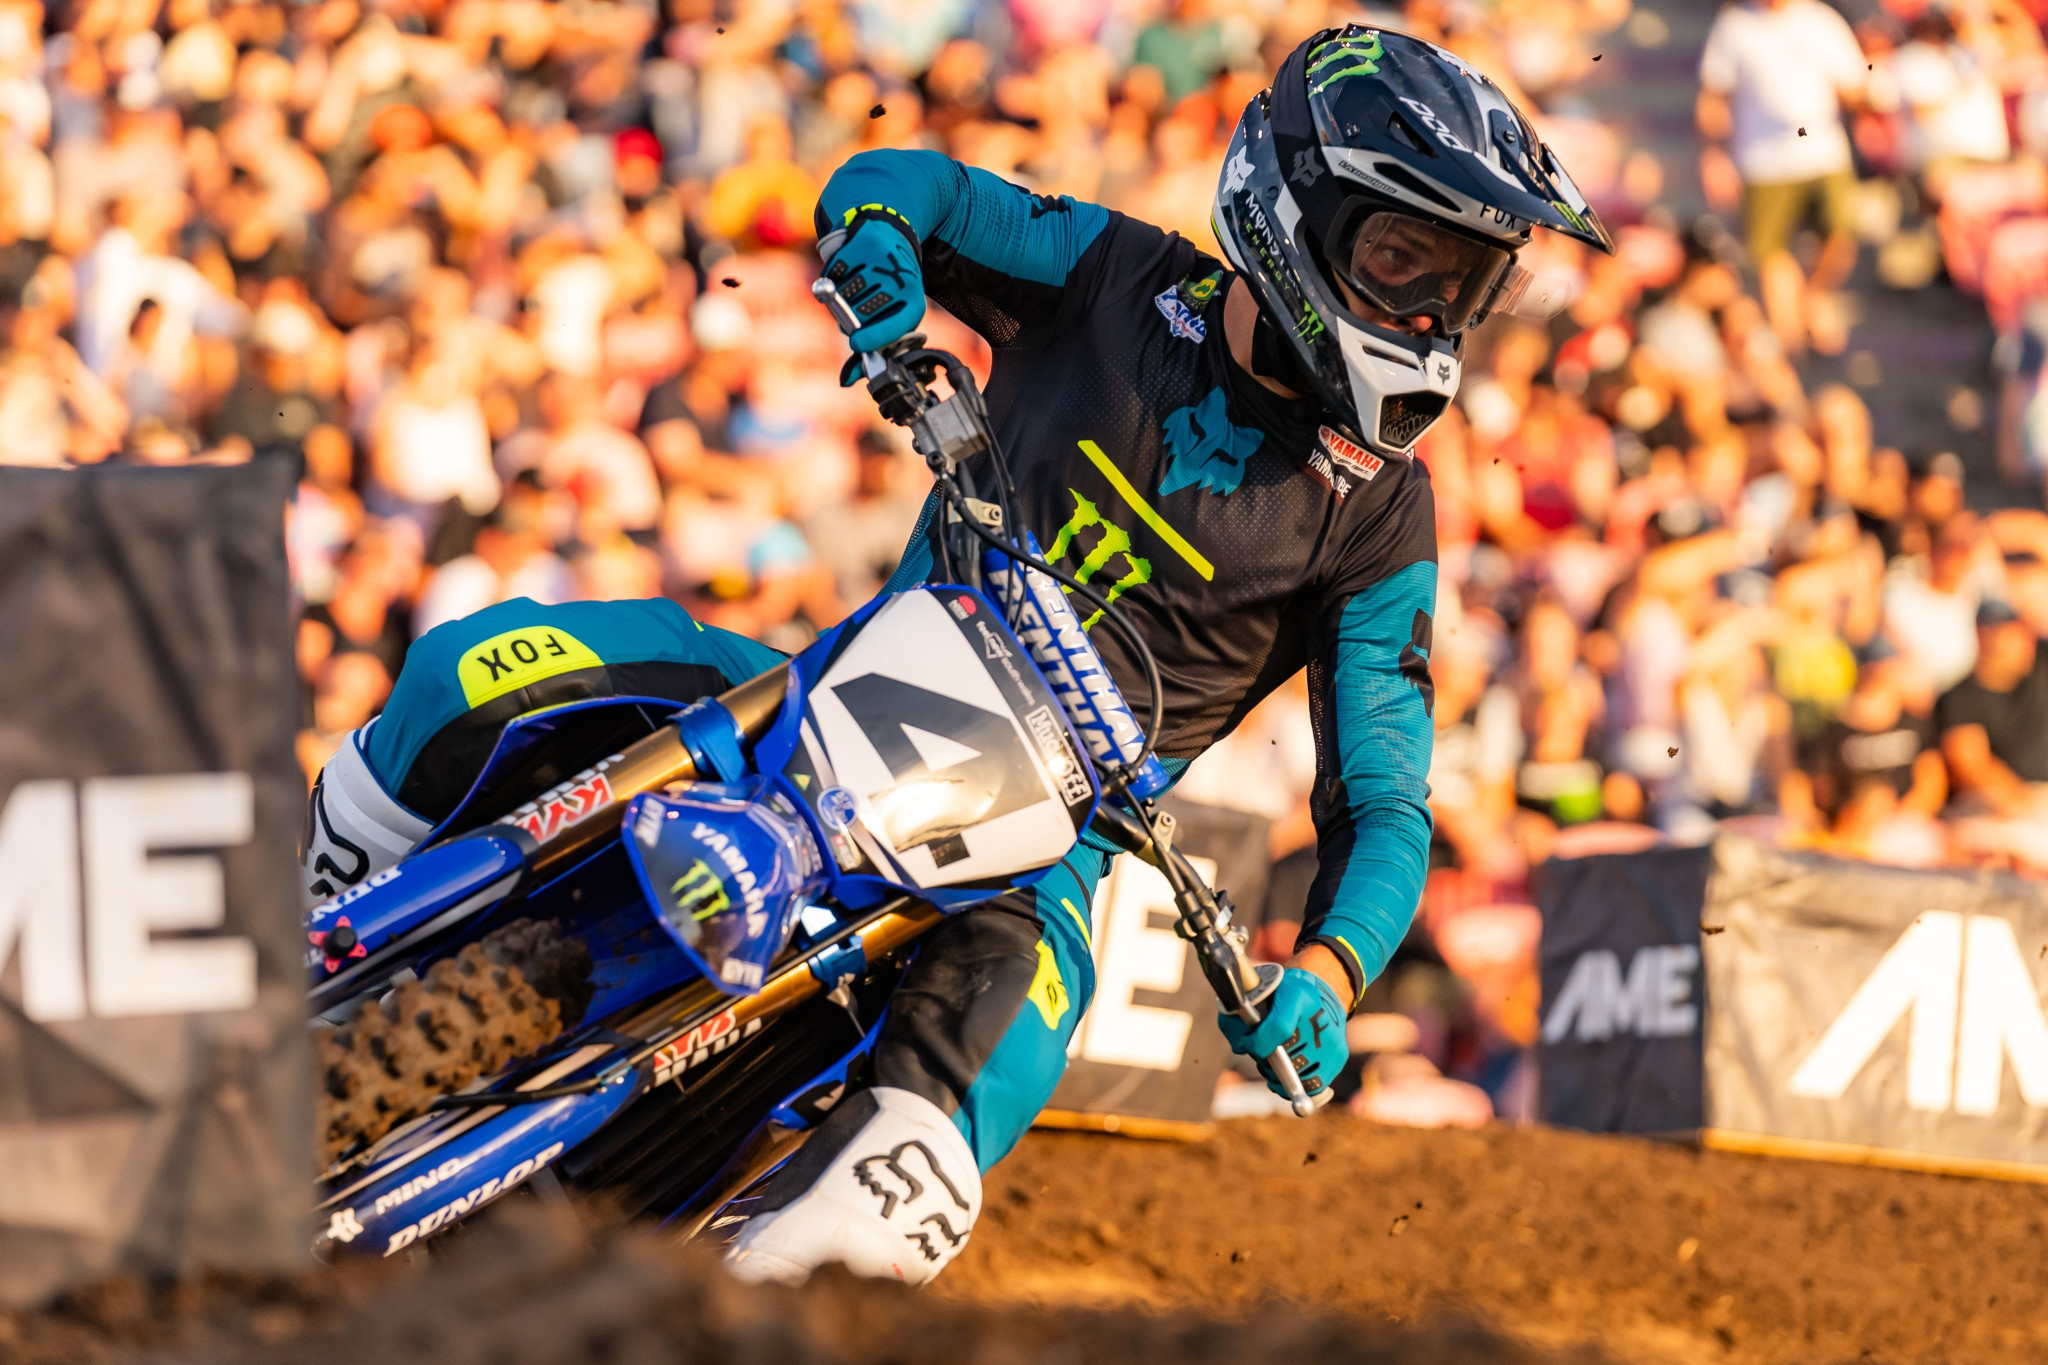 Supercross competition hitting Kayo - feature photo